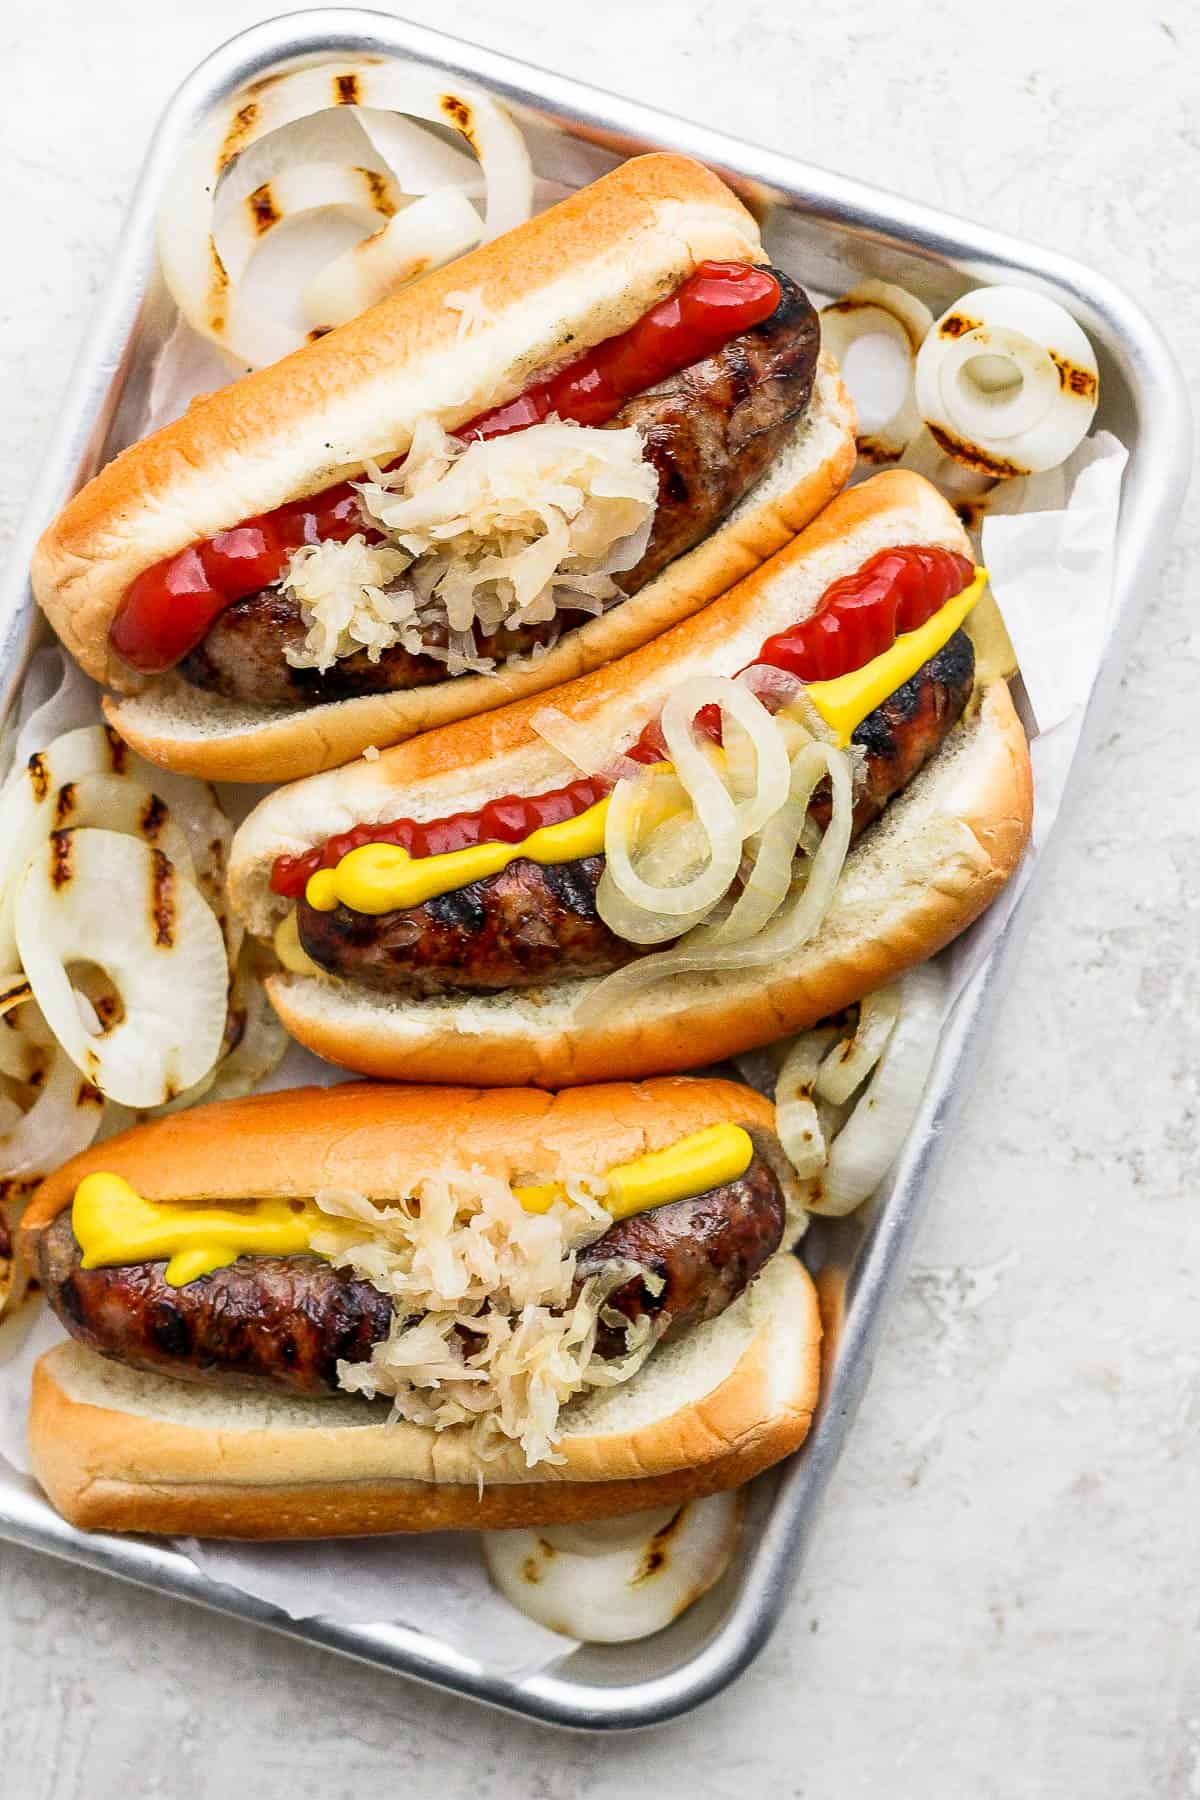 How to easily grill brats.